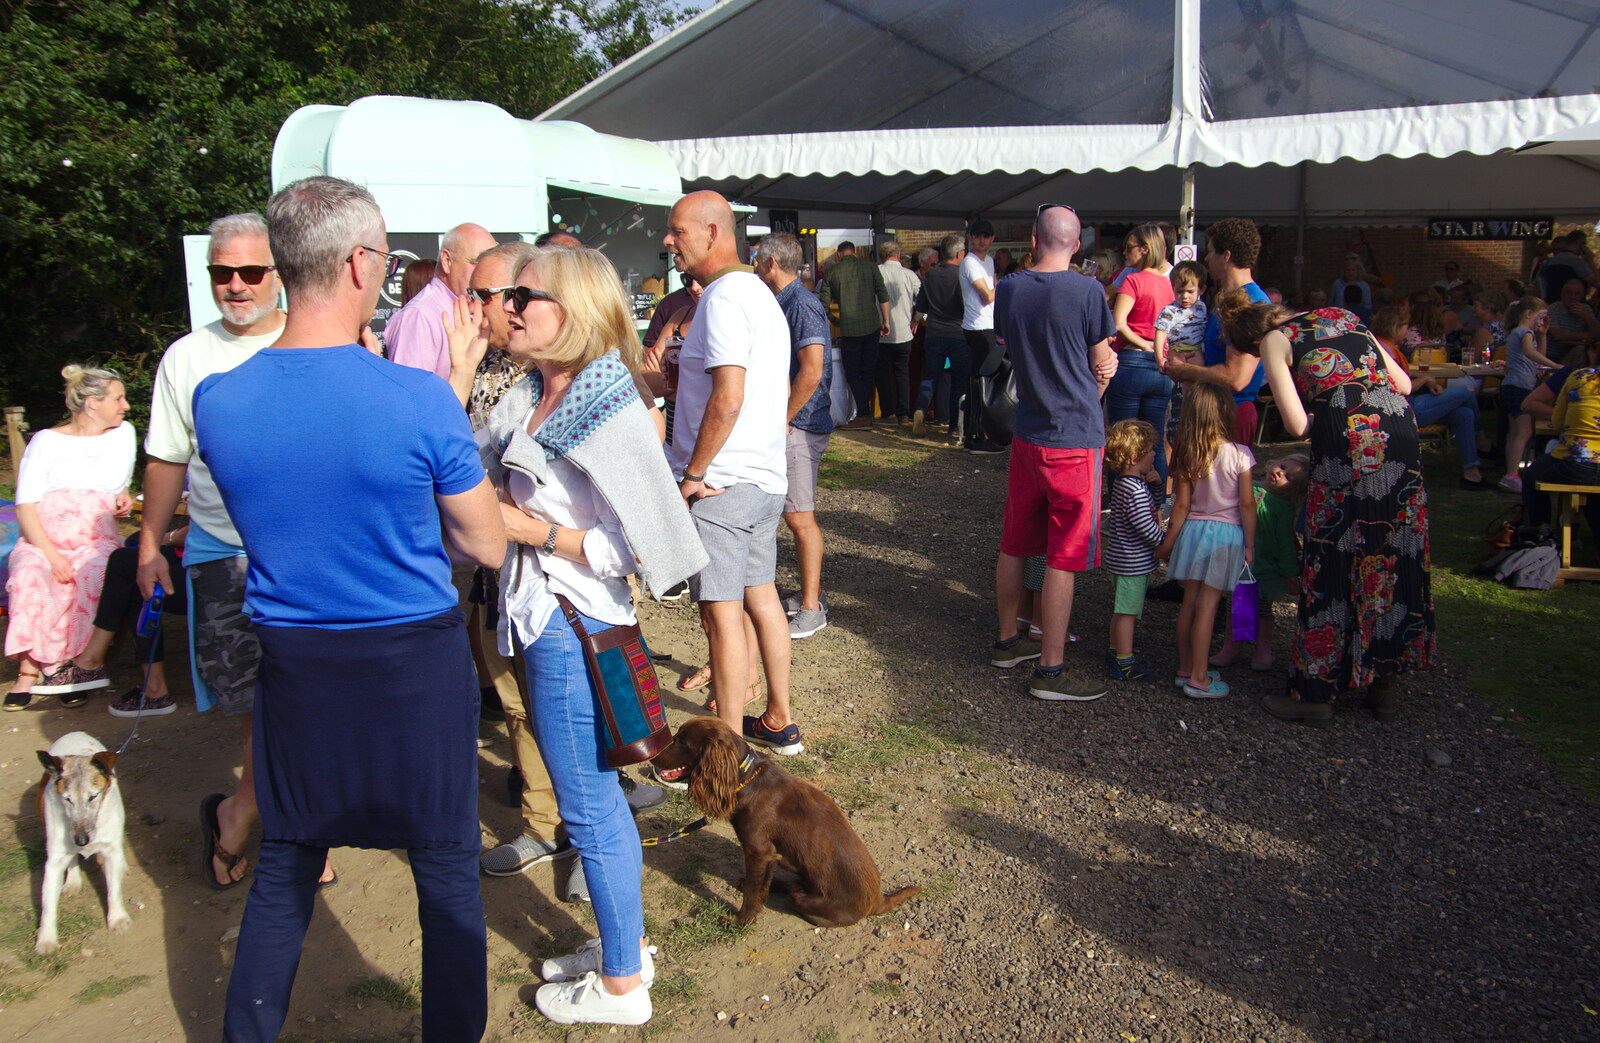 Crowds mingle around in the sun from The Shakesbeer Festival, Star Wing Brewery, Redgrave, Suffolk - 13th July 2019